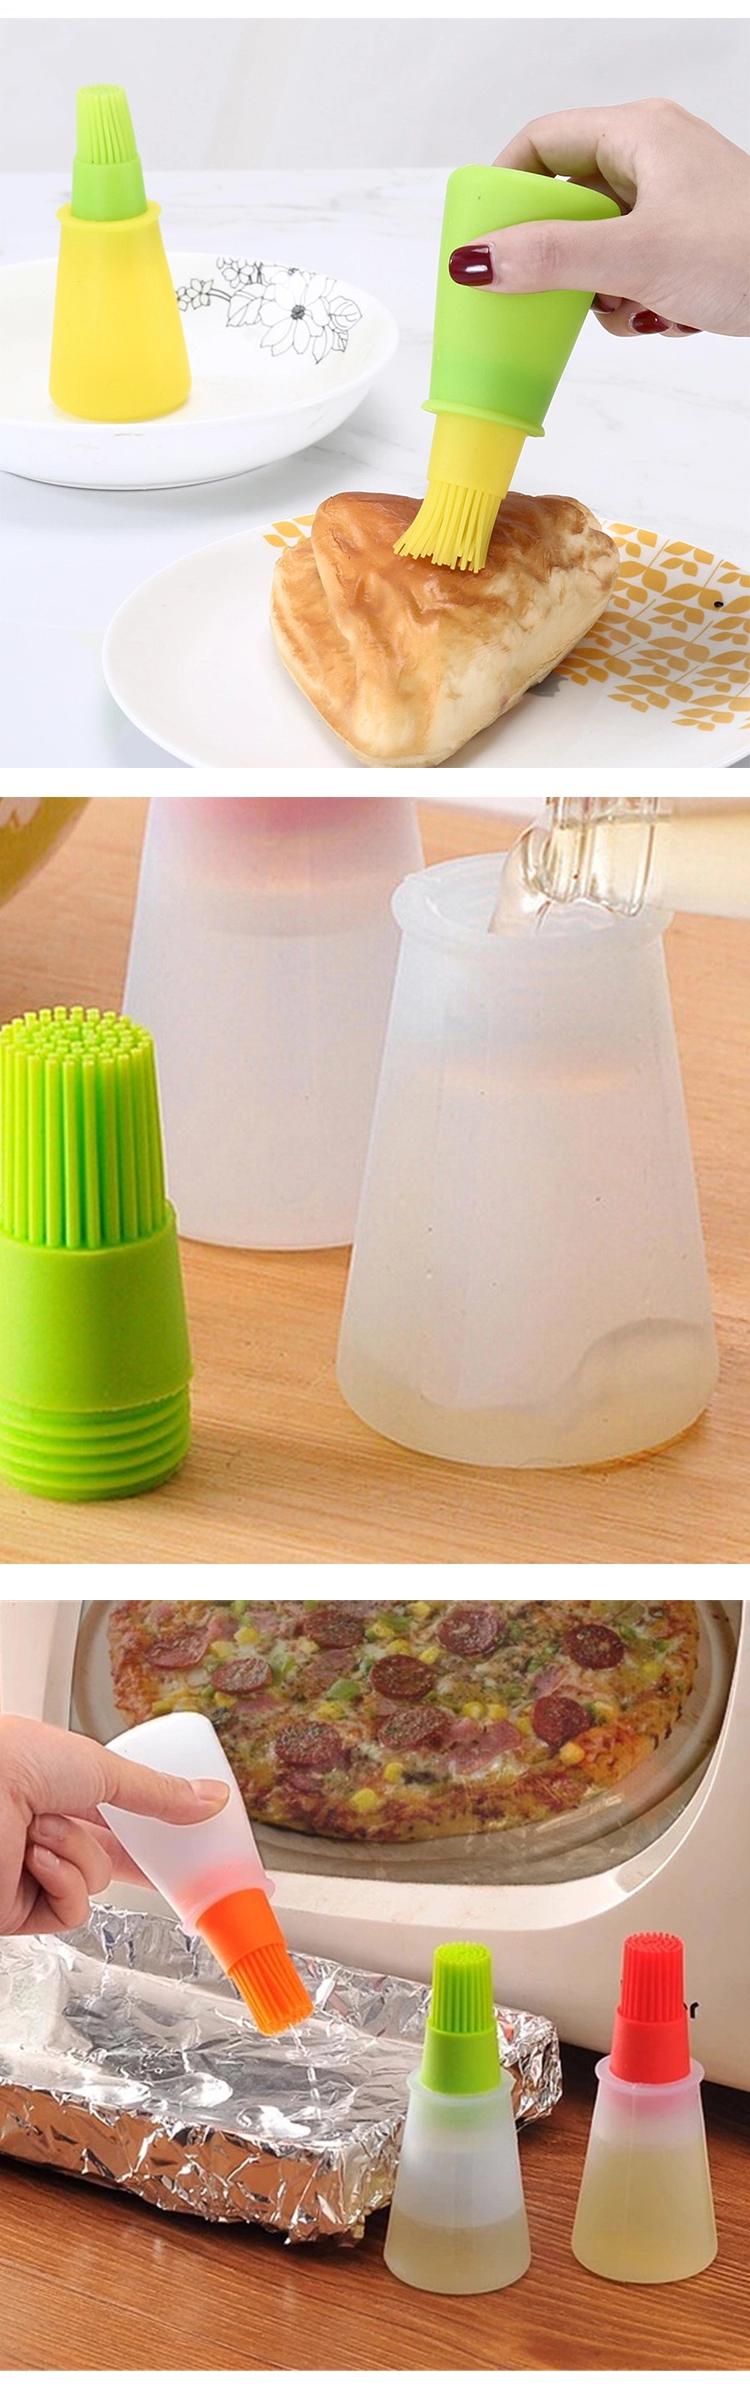 Portable Oil Bottle With Silicone Brush Baking BBQ Pastry Oil Brush